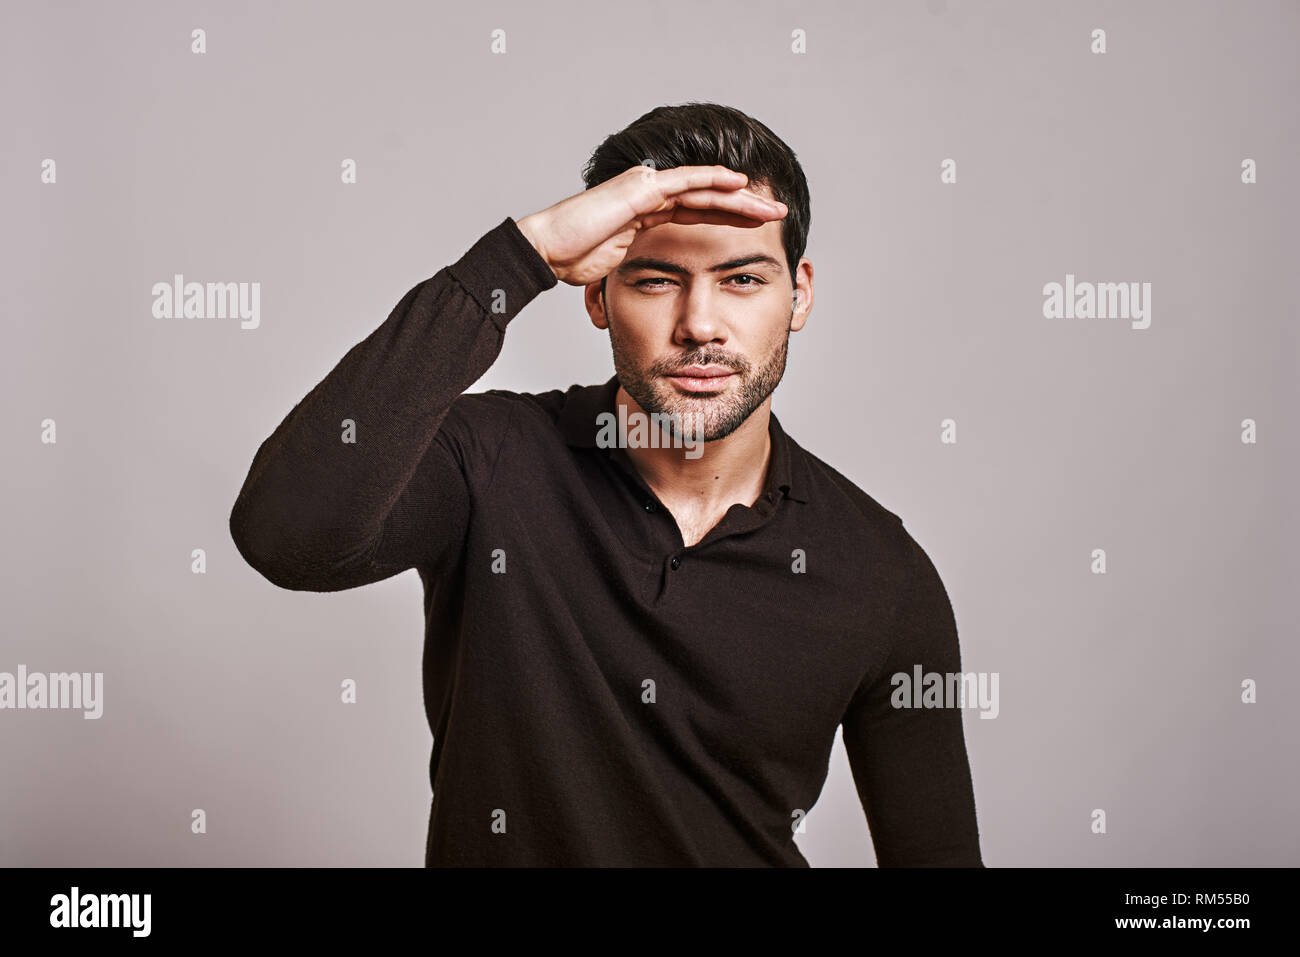 Closeup portrait of young serious curious squinting man, hand on head, peering ahead, searching for something, looking to the future at camera, isolated over white background. Sign, symbols Stock Photo